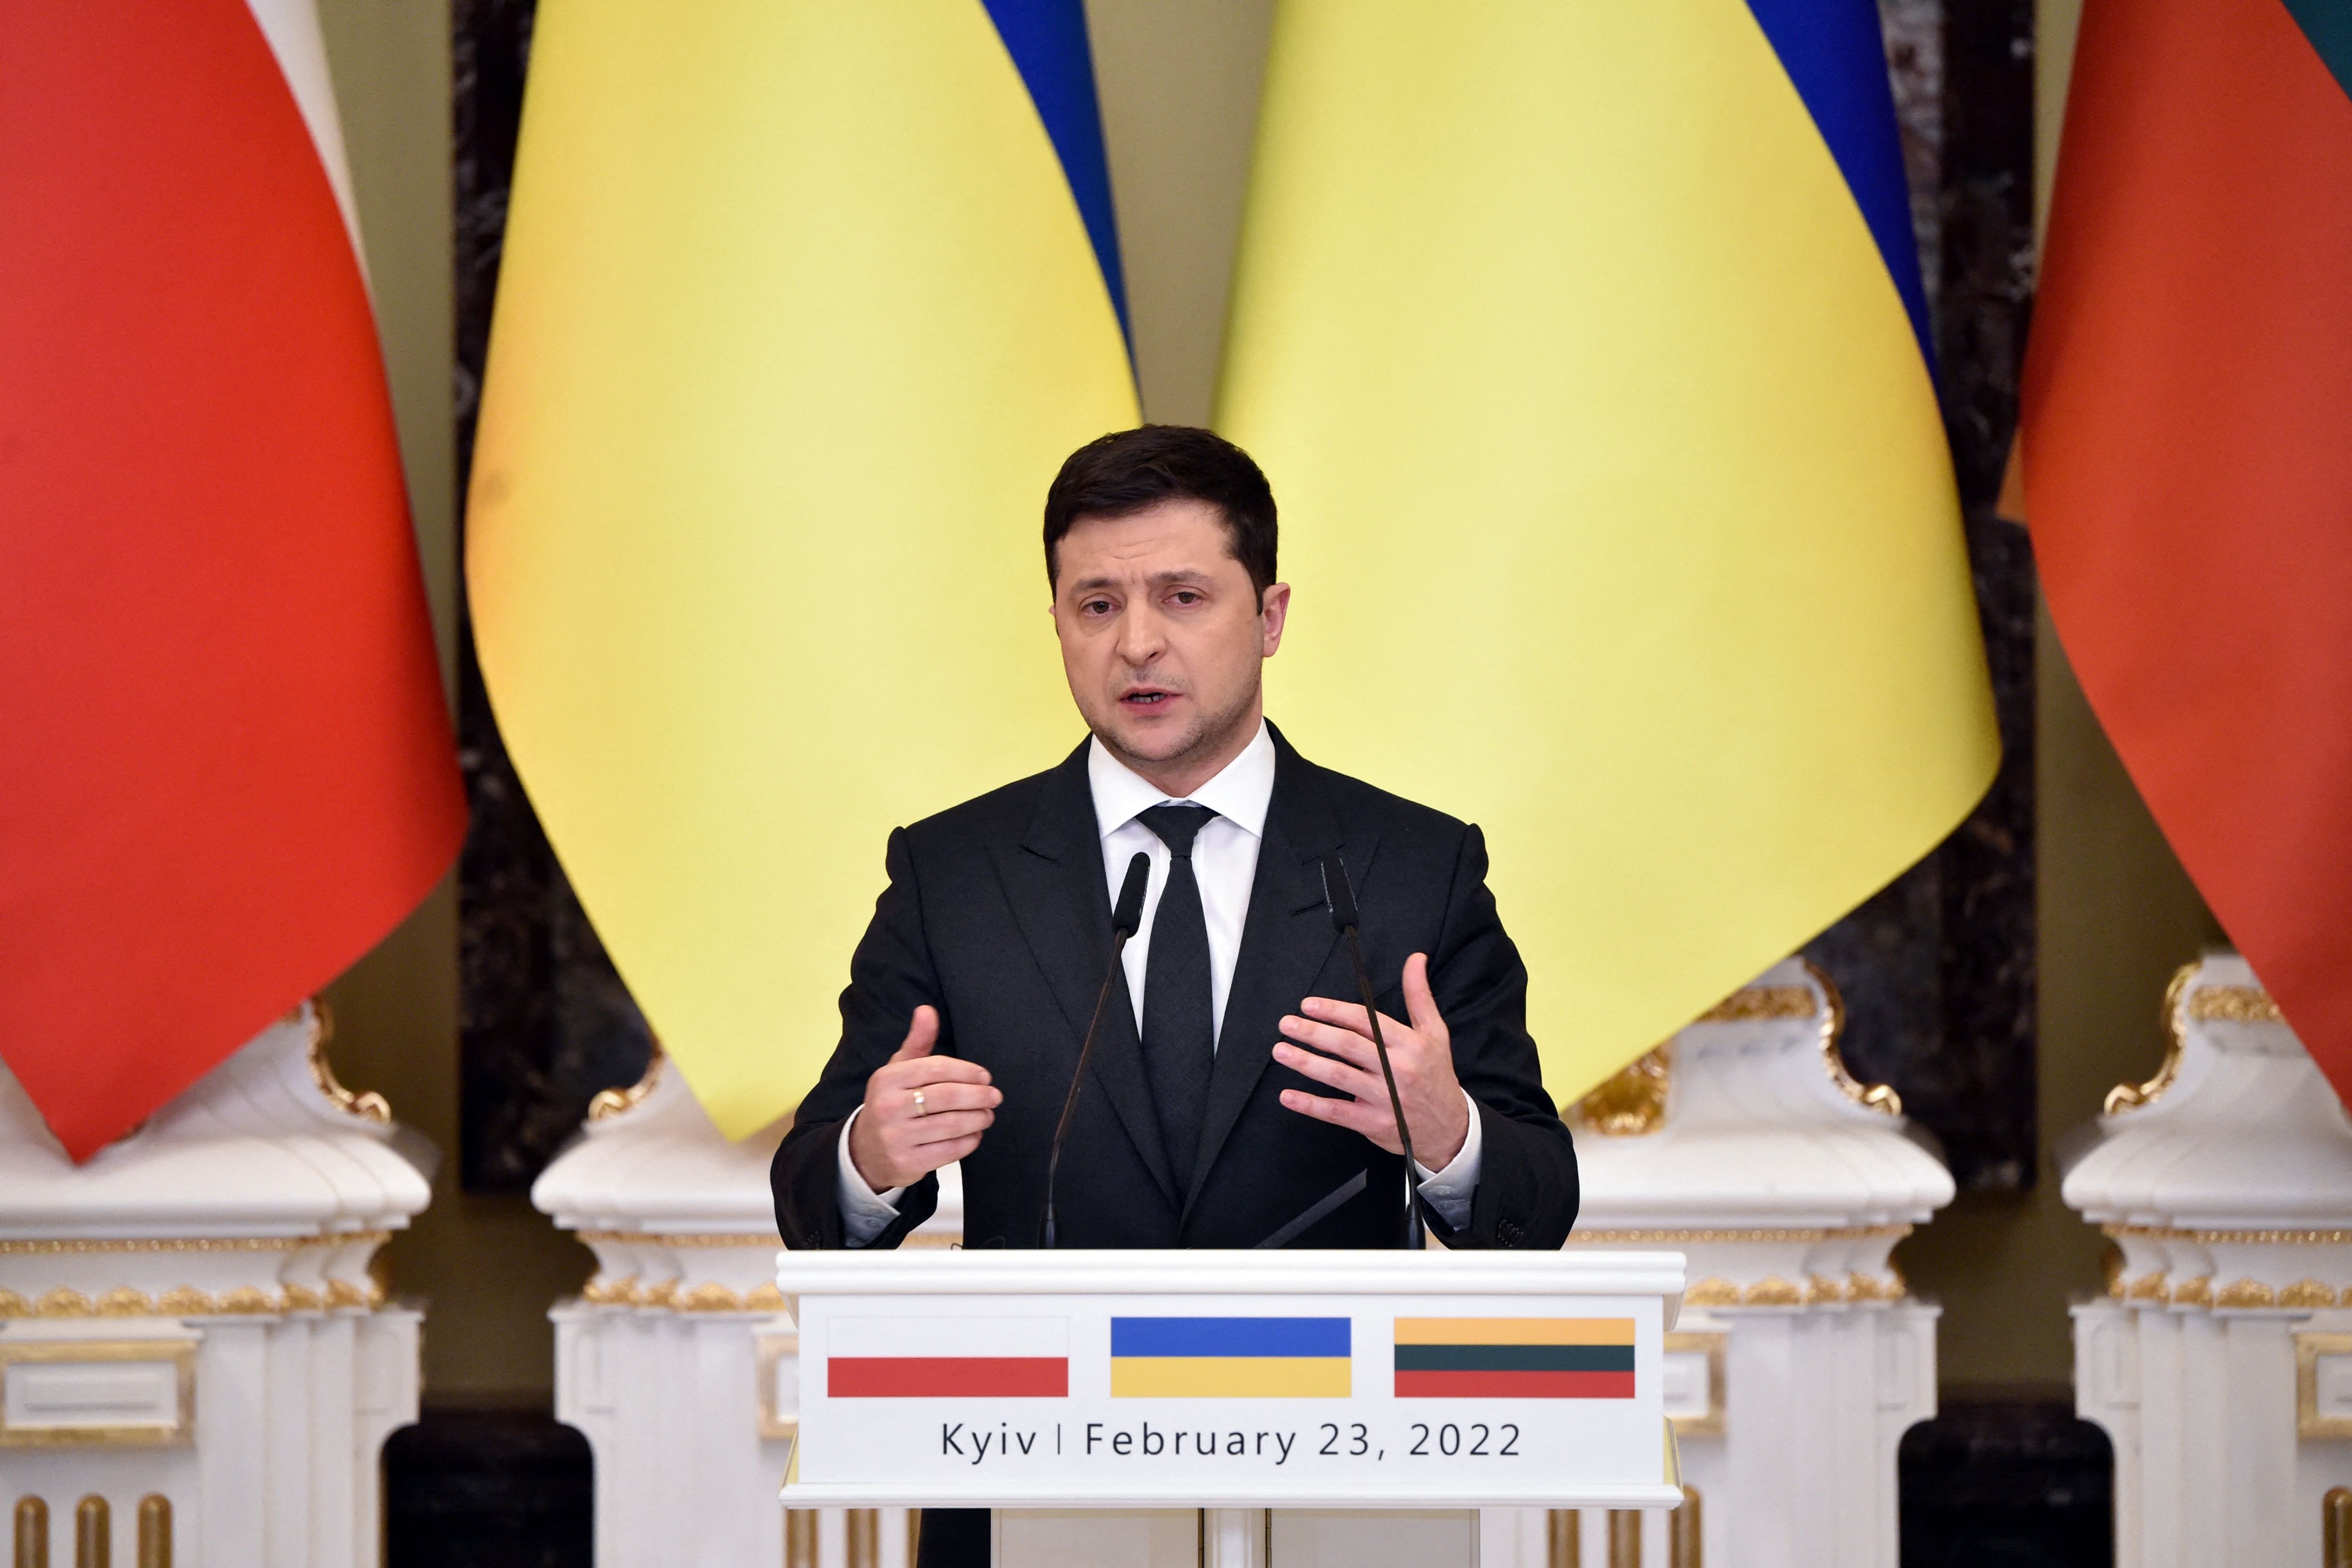 Ukrainian President Volodymyr Zelensky attends a joint press conference with his counterparts from Lithuania and Poland following their talks in Kyiv, Ukraine, on February 23.